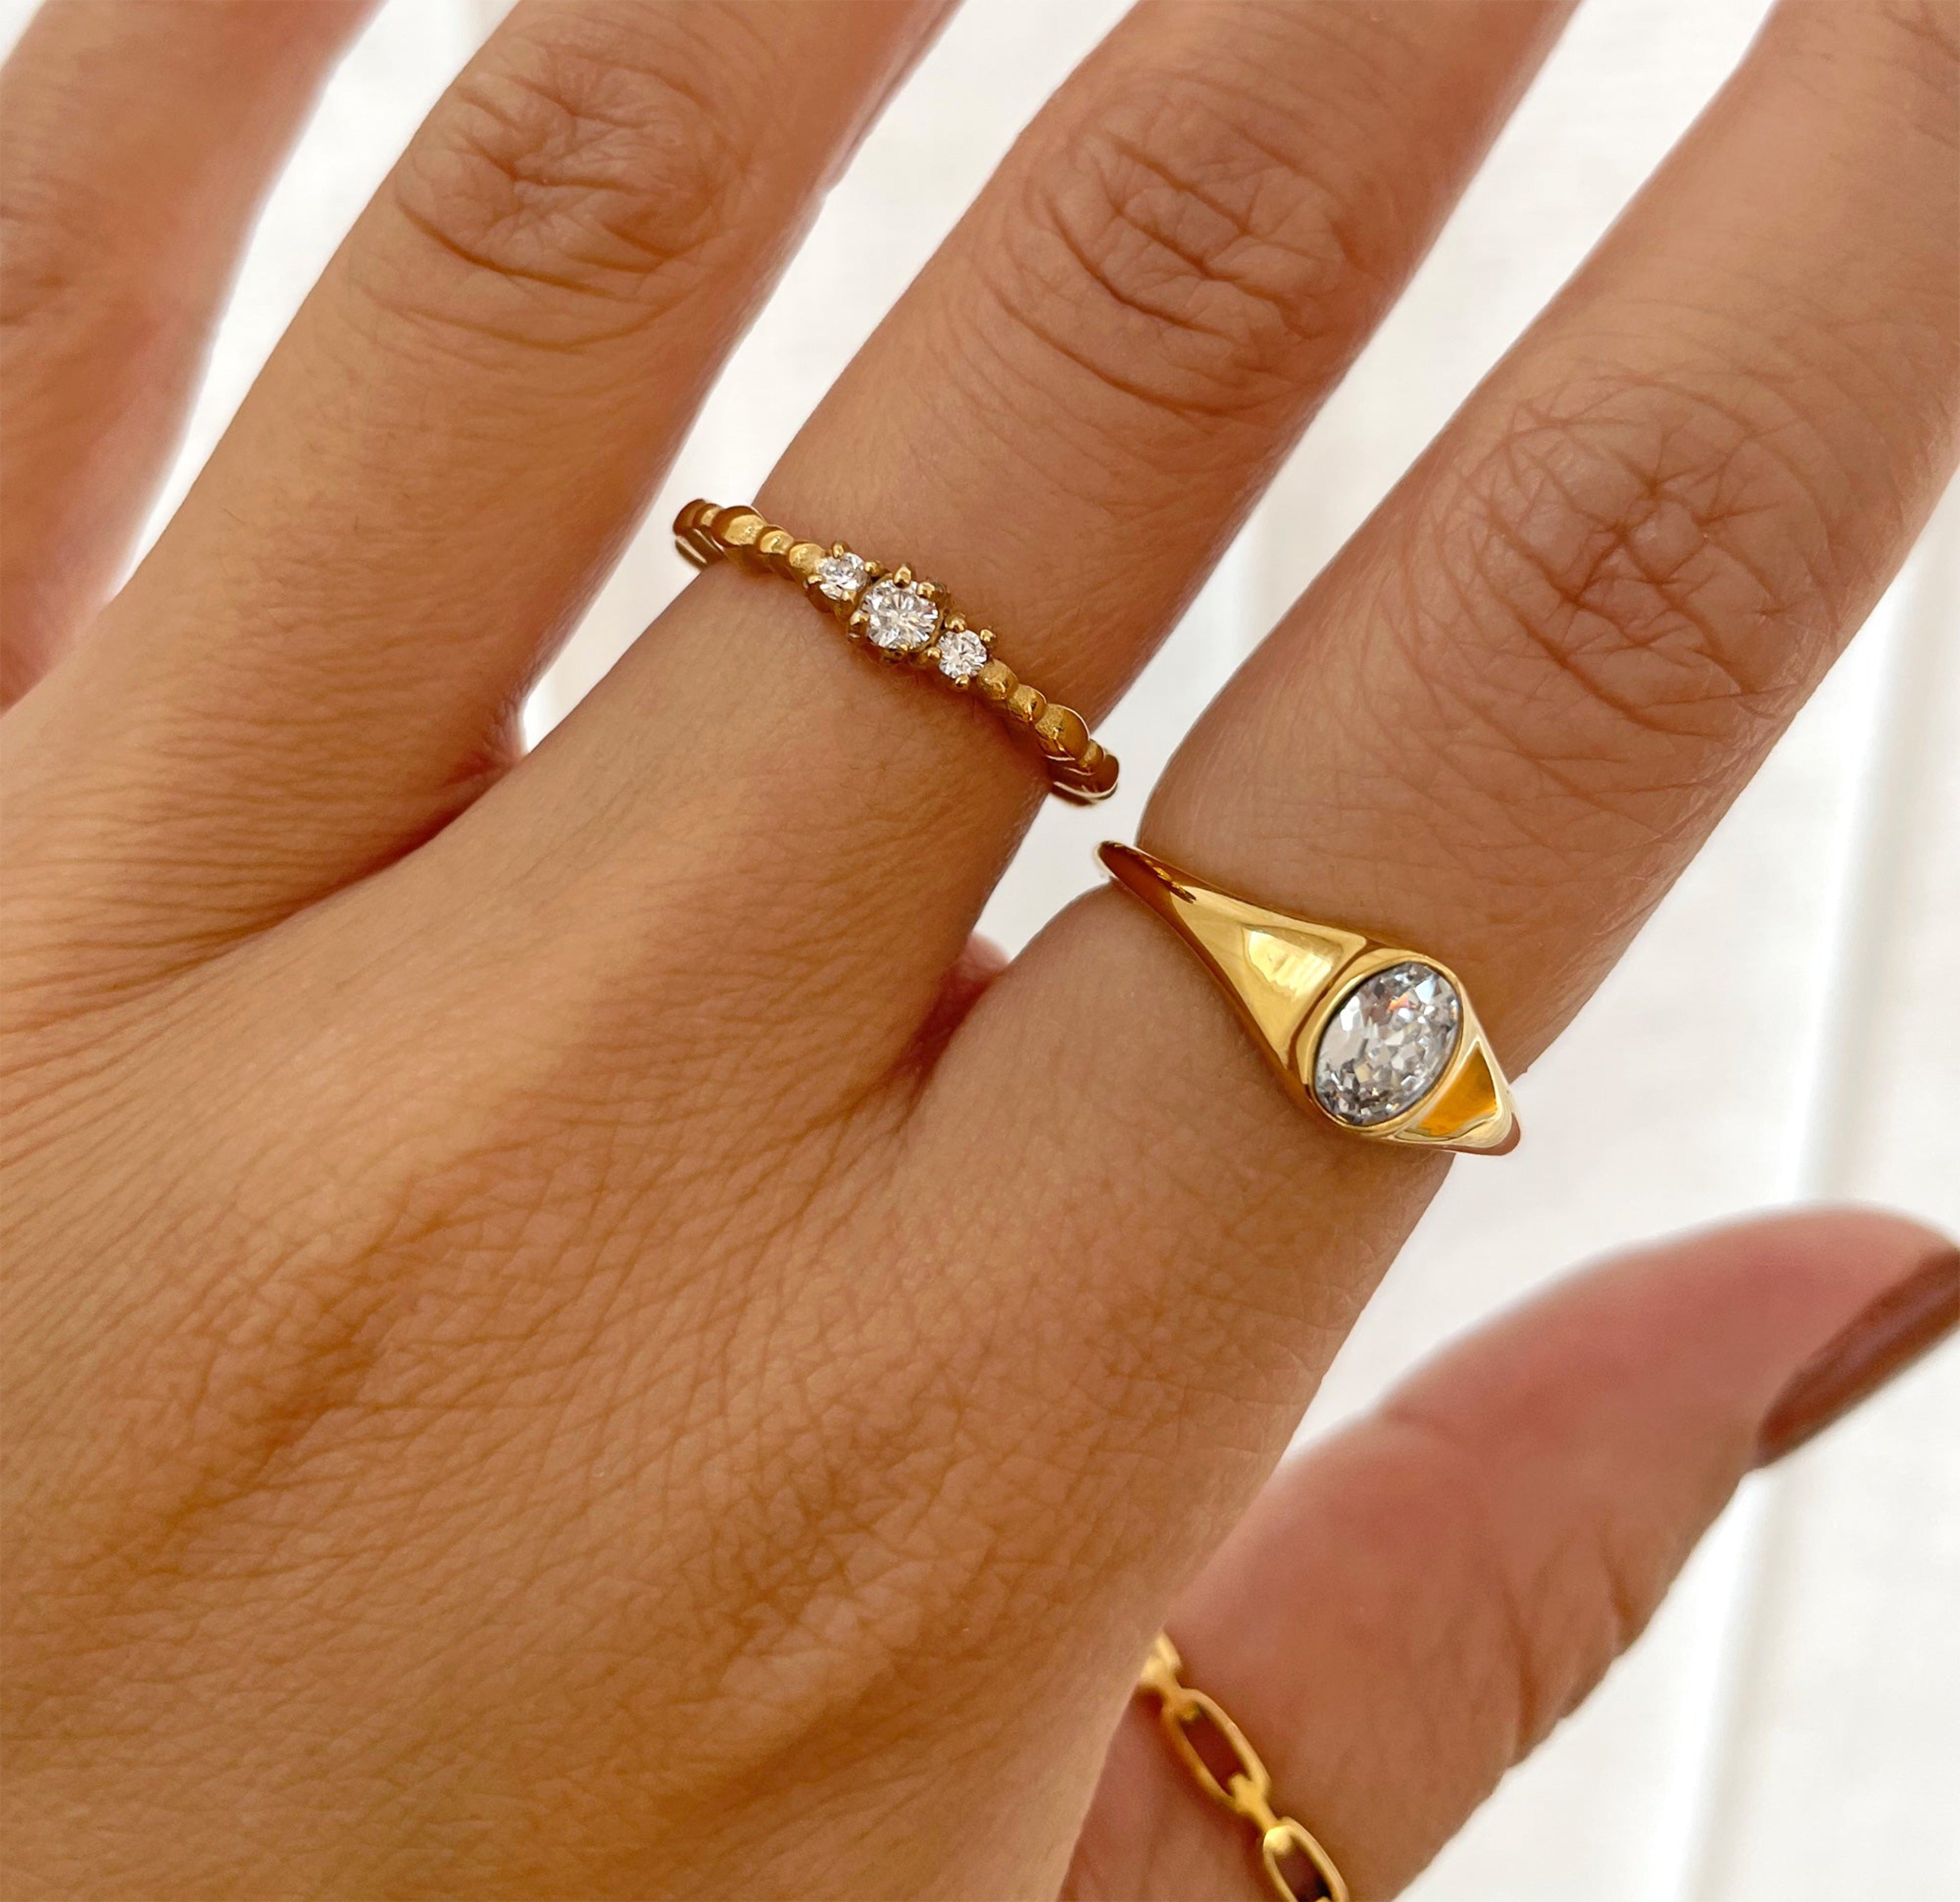 Jeanie gold oval stone ring paired with Celeste dainty solitaire ring. Waterproof jewelry